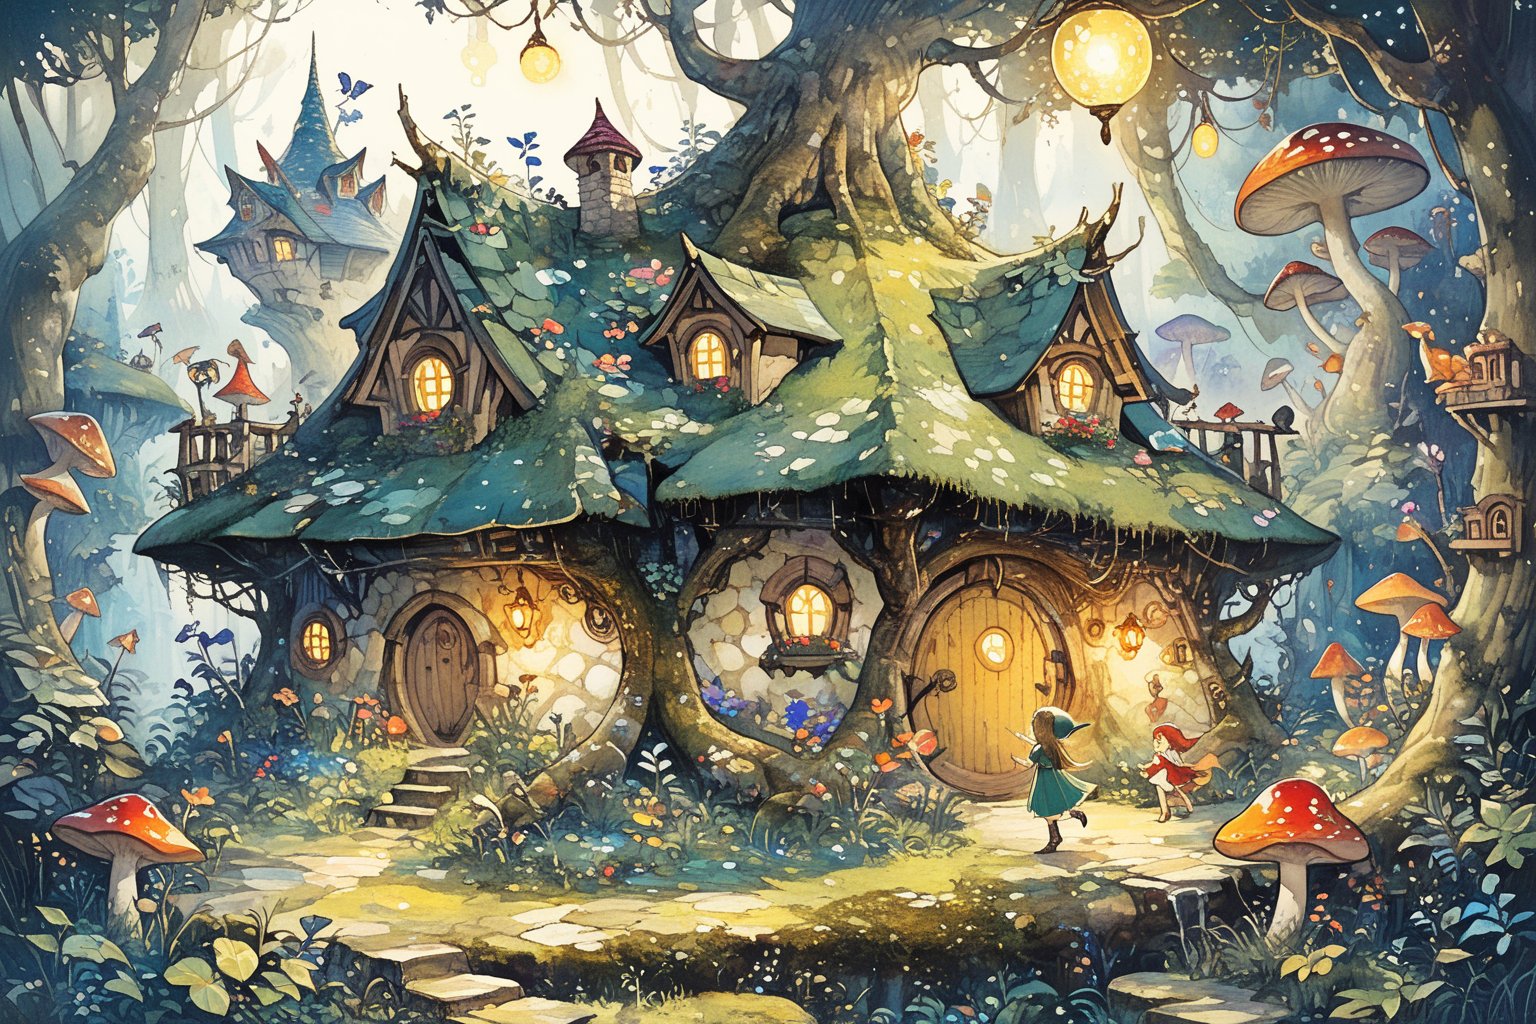 Magic, oil painting style, depicting a mysterious little elf hiding in a tree hollow. The elf has pointed ears and a cute, whimsical appearance. Fireflies illuminate the scene, set in an epic, deep forest. Numerous small mushroom houses and tiny doors attached to tree trunks add to the fairy tale world atmosphere. cinematic pose, fairy atmosphere, highly detailed, dramatic lighting. Forest background, digital painting, masterpiece, maximalism, near perfection, design by Greg Rutkowski + Esao Andrews, oil painting
